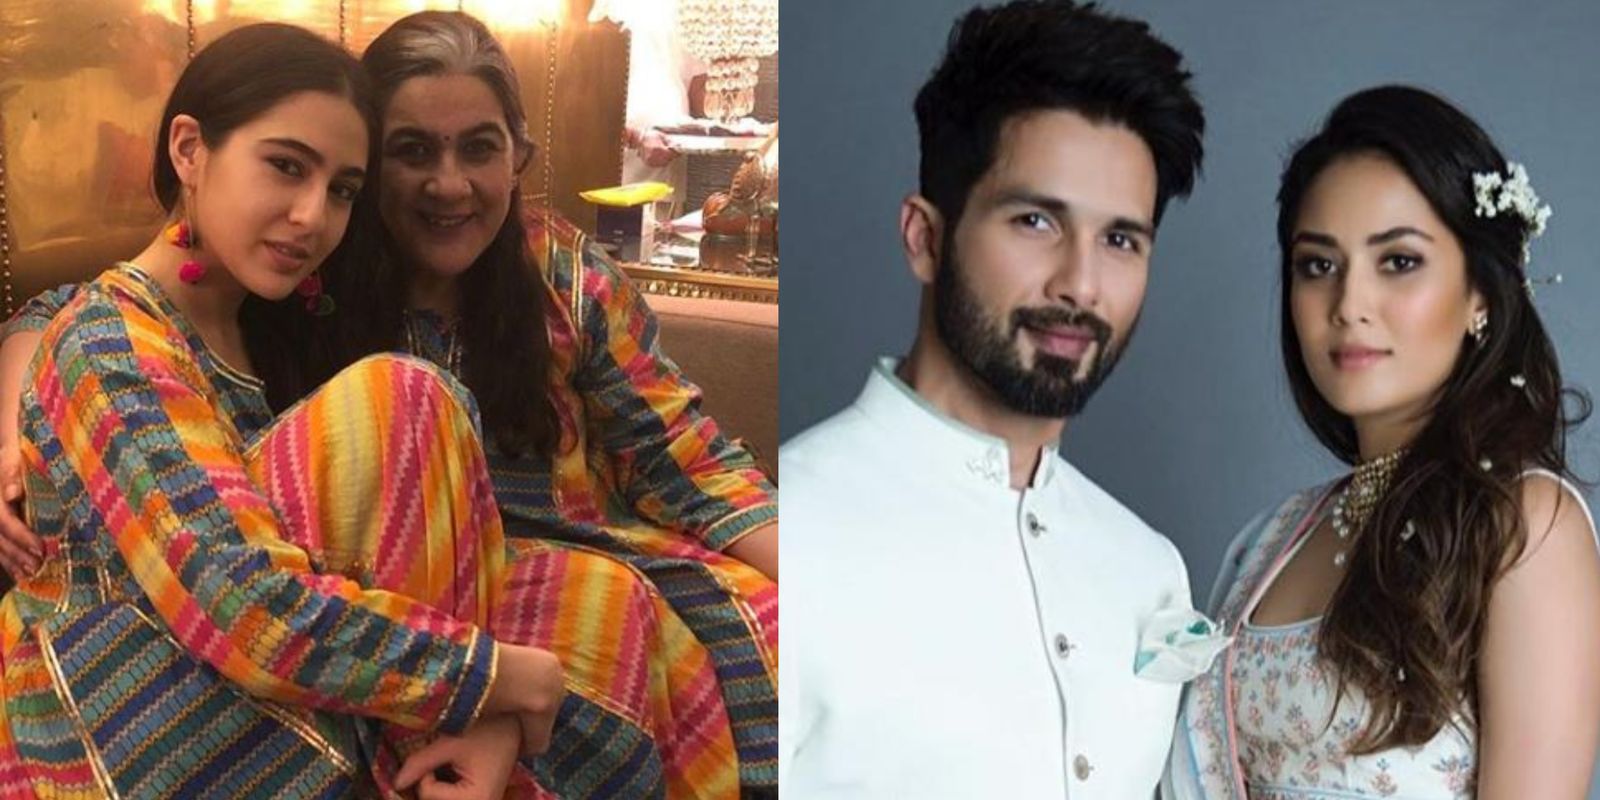 Mira Rajput Wants Us To Look Back At Shahid Kapoor's Complan Ad; Sara Ali Khan Twins With Her Mom